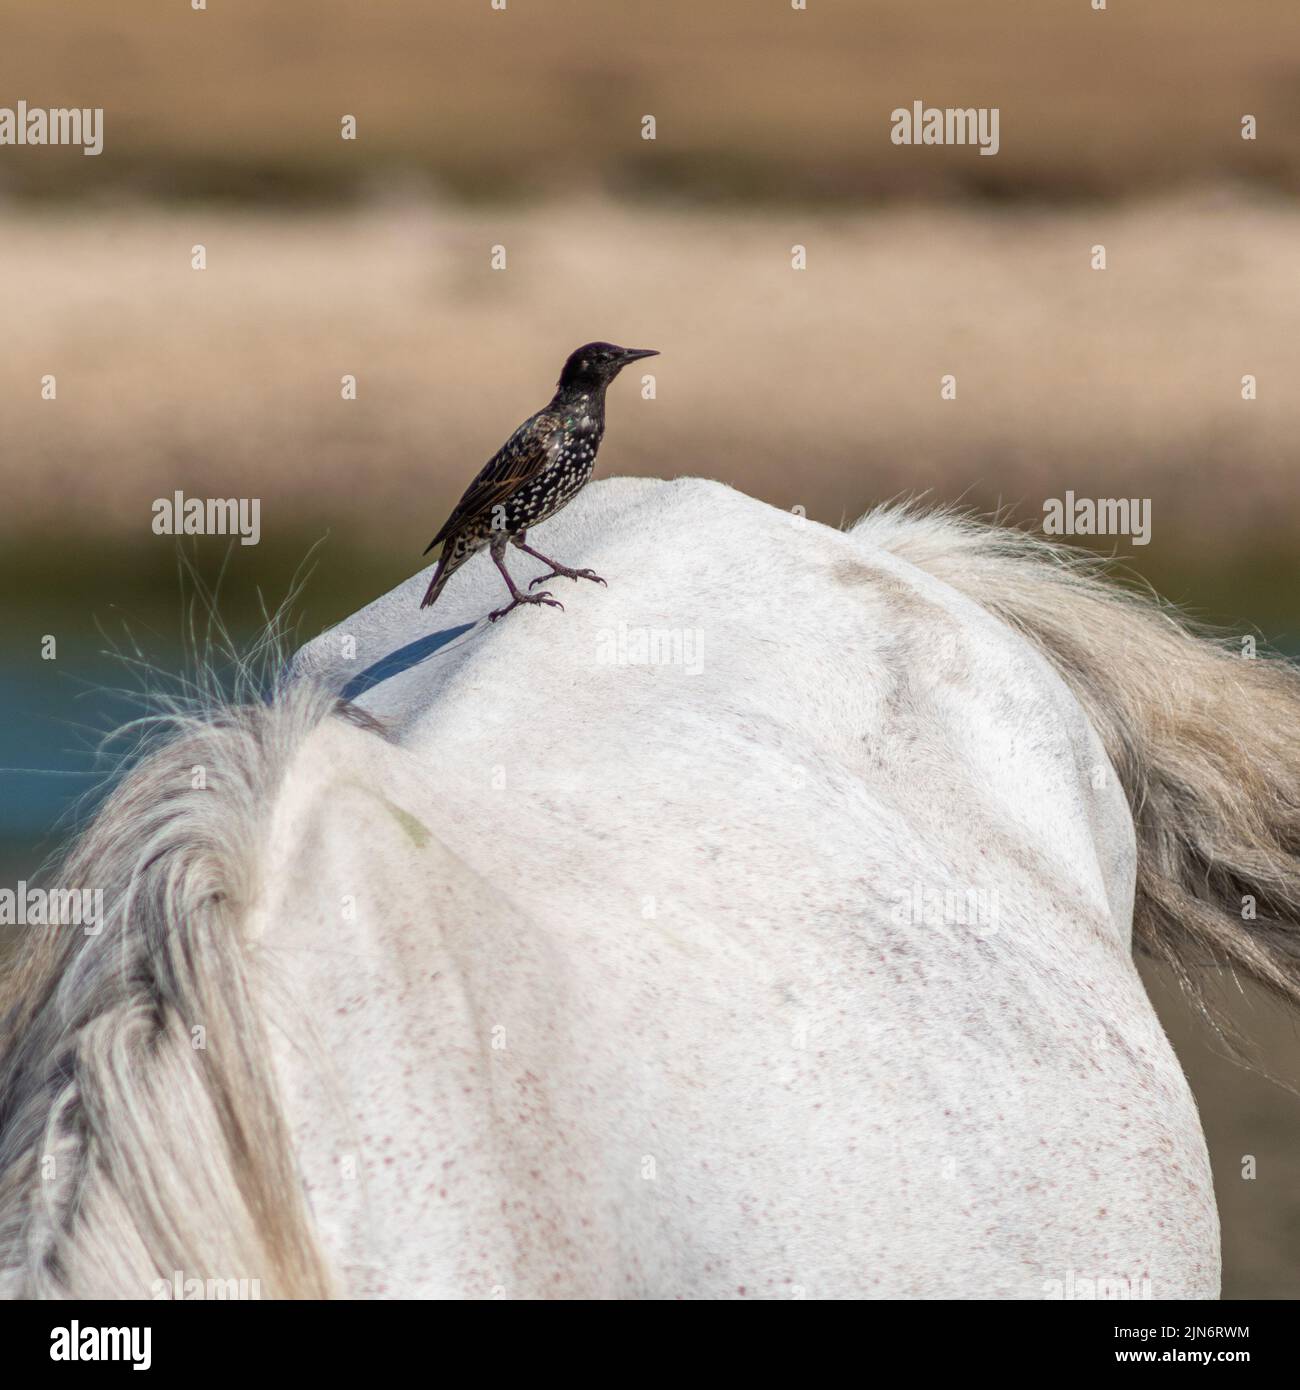 Starling, black bird perched on the back of a white horse Stock Photo